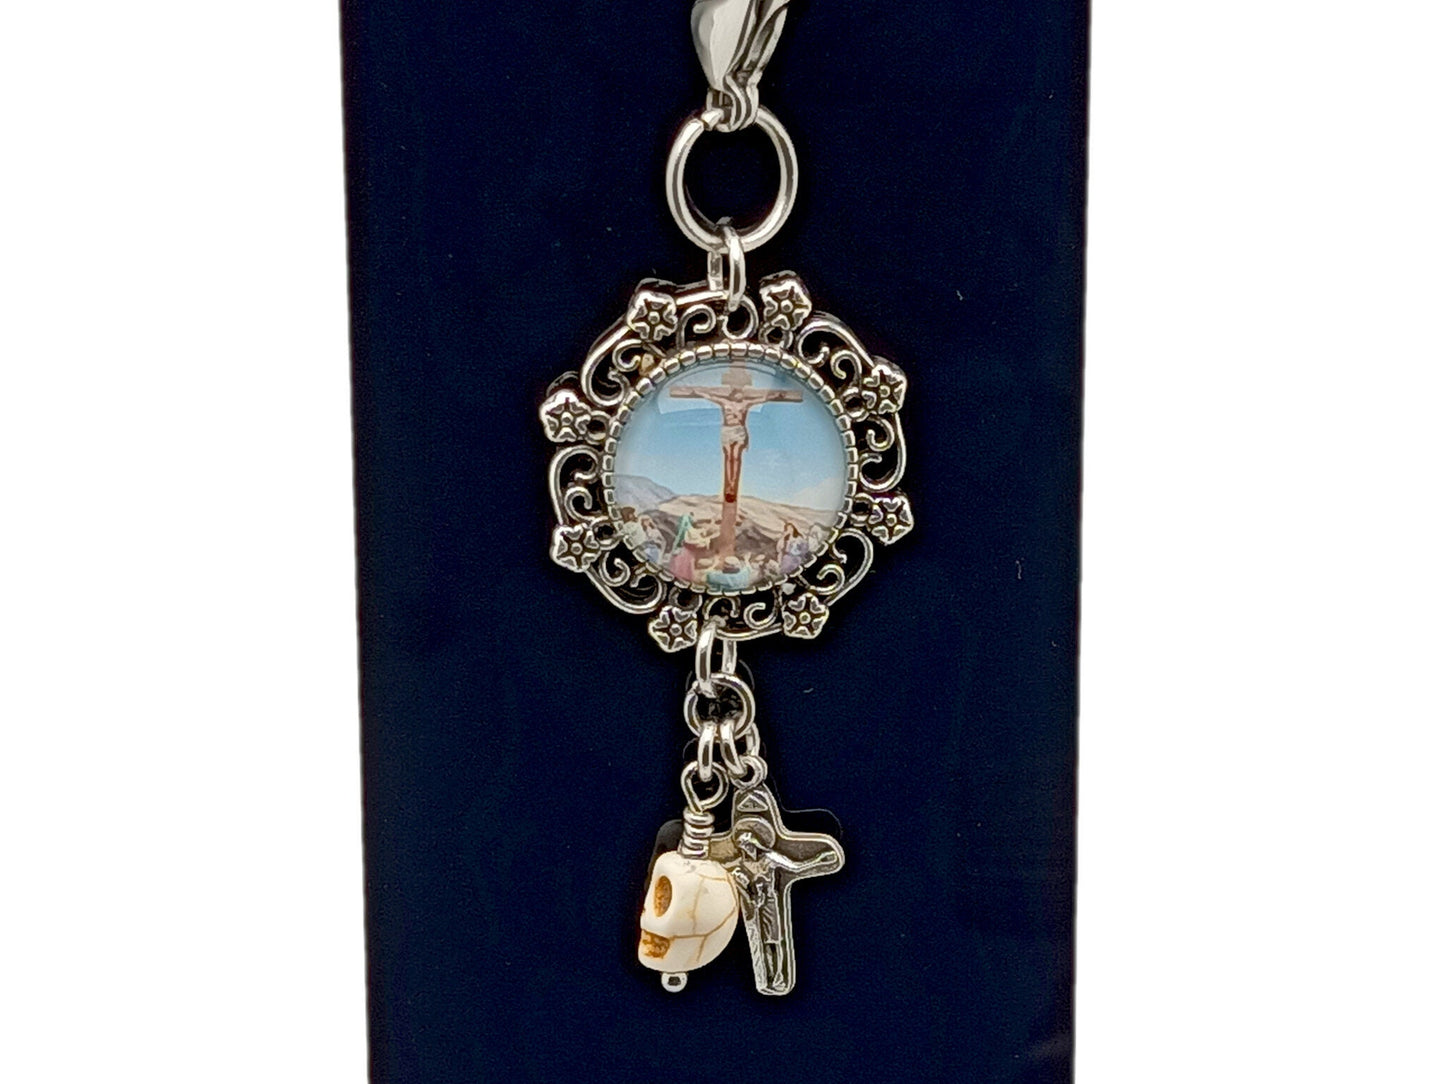 The Crucifixion unique roasry beads purse clip key chain with picture medal, memento mori and Virgin Mary crucifix.